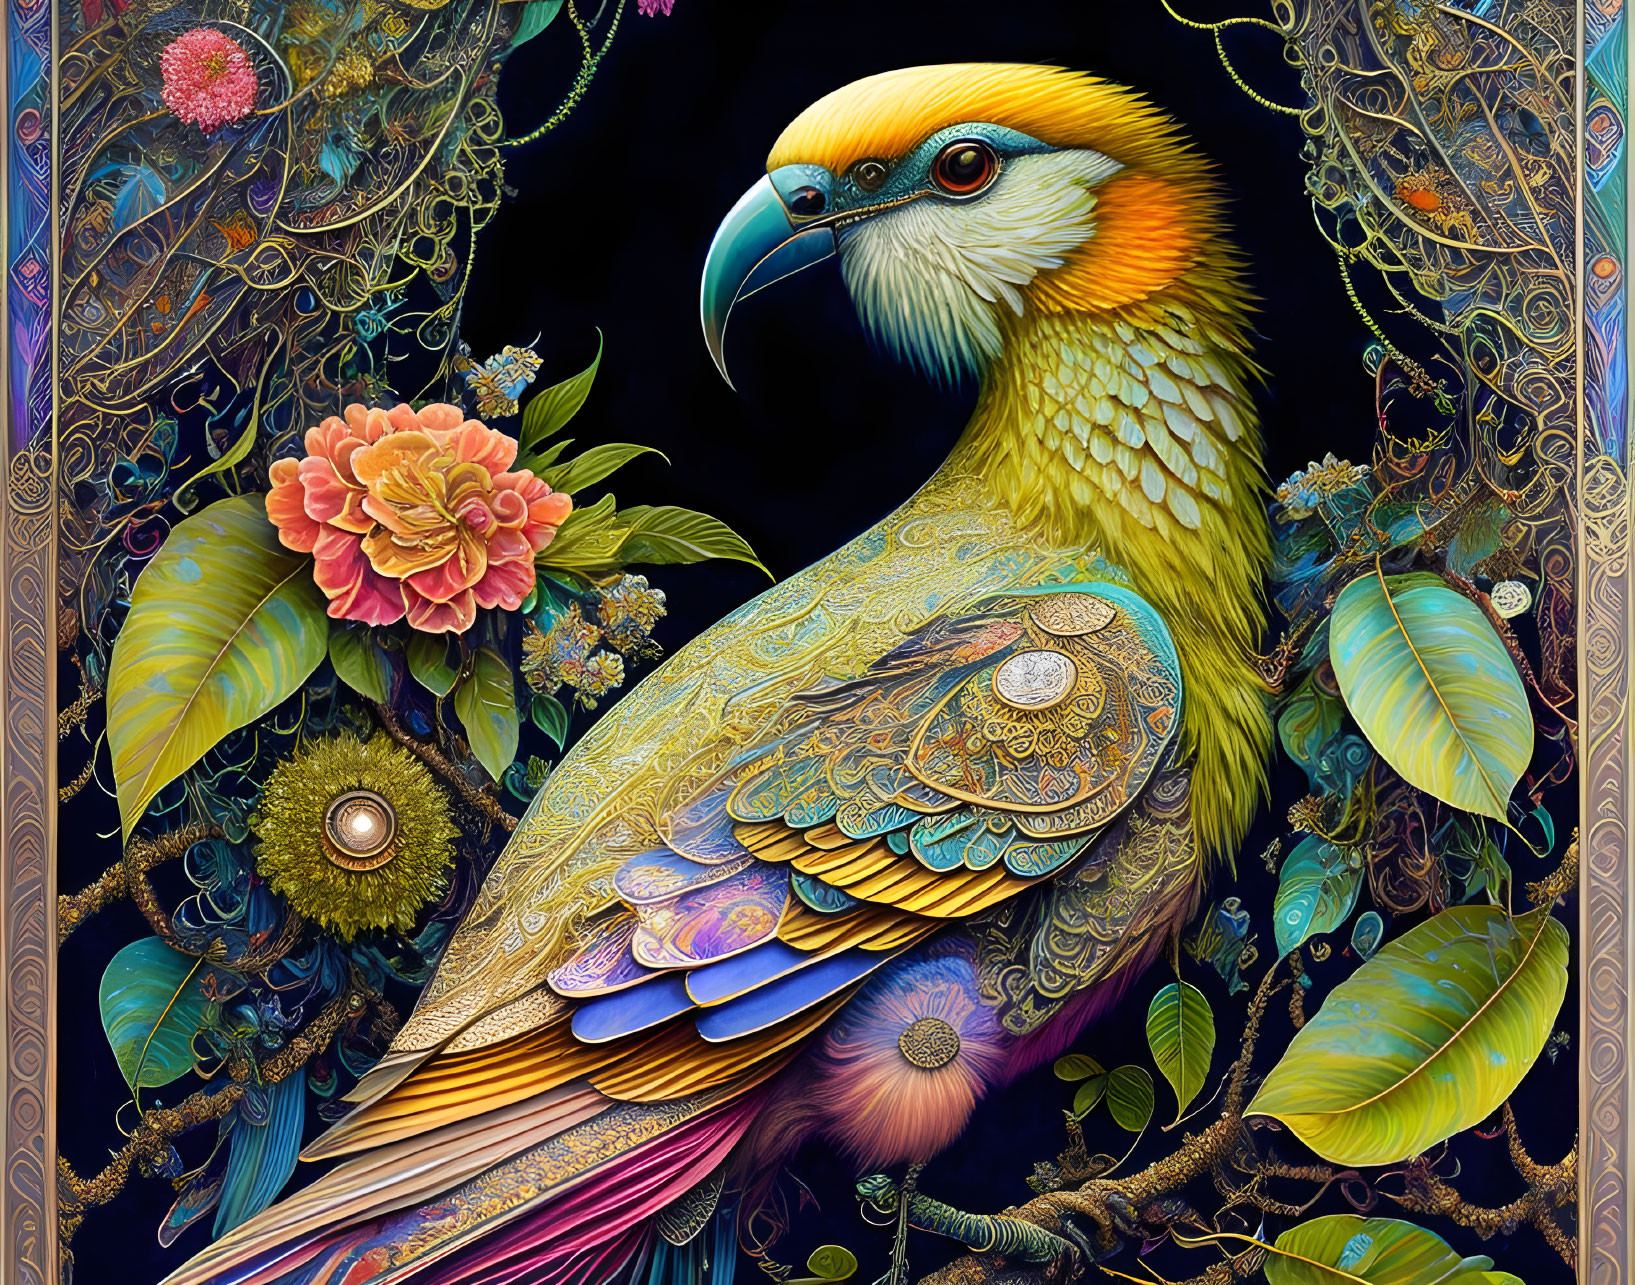 Colorful Majestic Bird with Floral and Ornamental Patterns on Dark Background